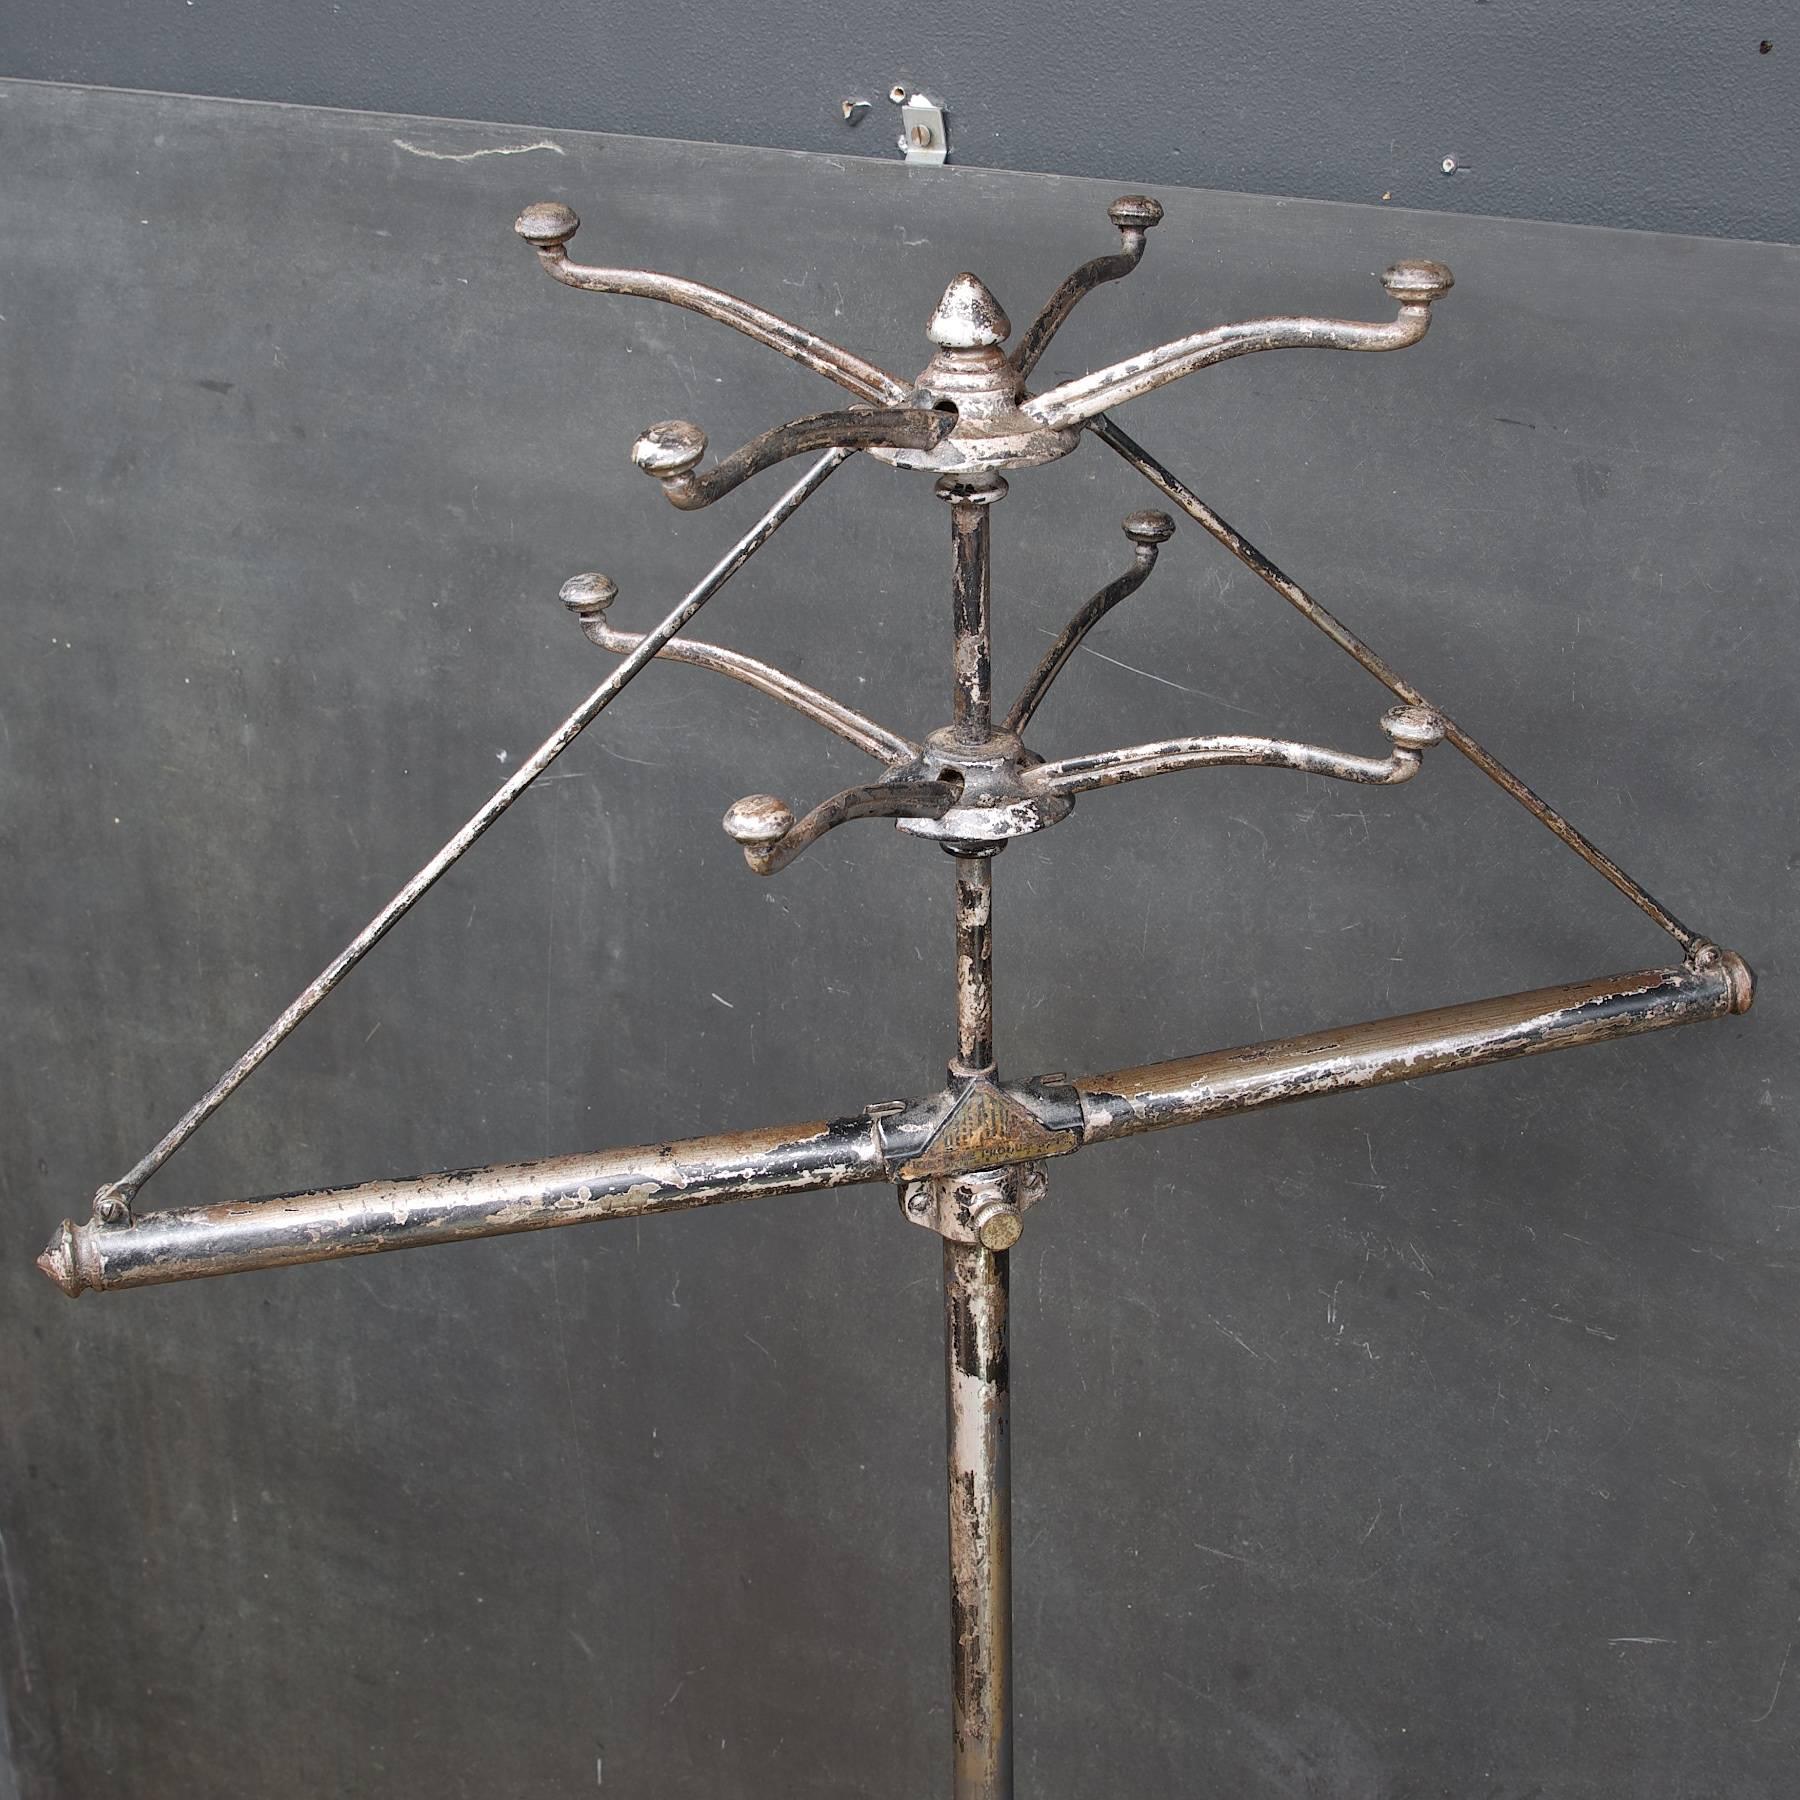 USA, circa 1890s. Made in Lebannon or Columbia Pennsylvania factory. Authentic and rare vintage Industrial coal power plant office folding coat rack. Fully functional and complete. Cast iron, steel, brass and patinated enamel components. Time worn